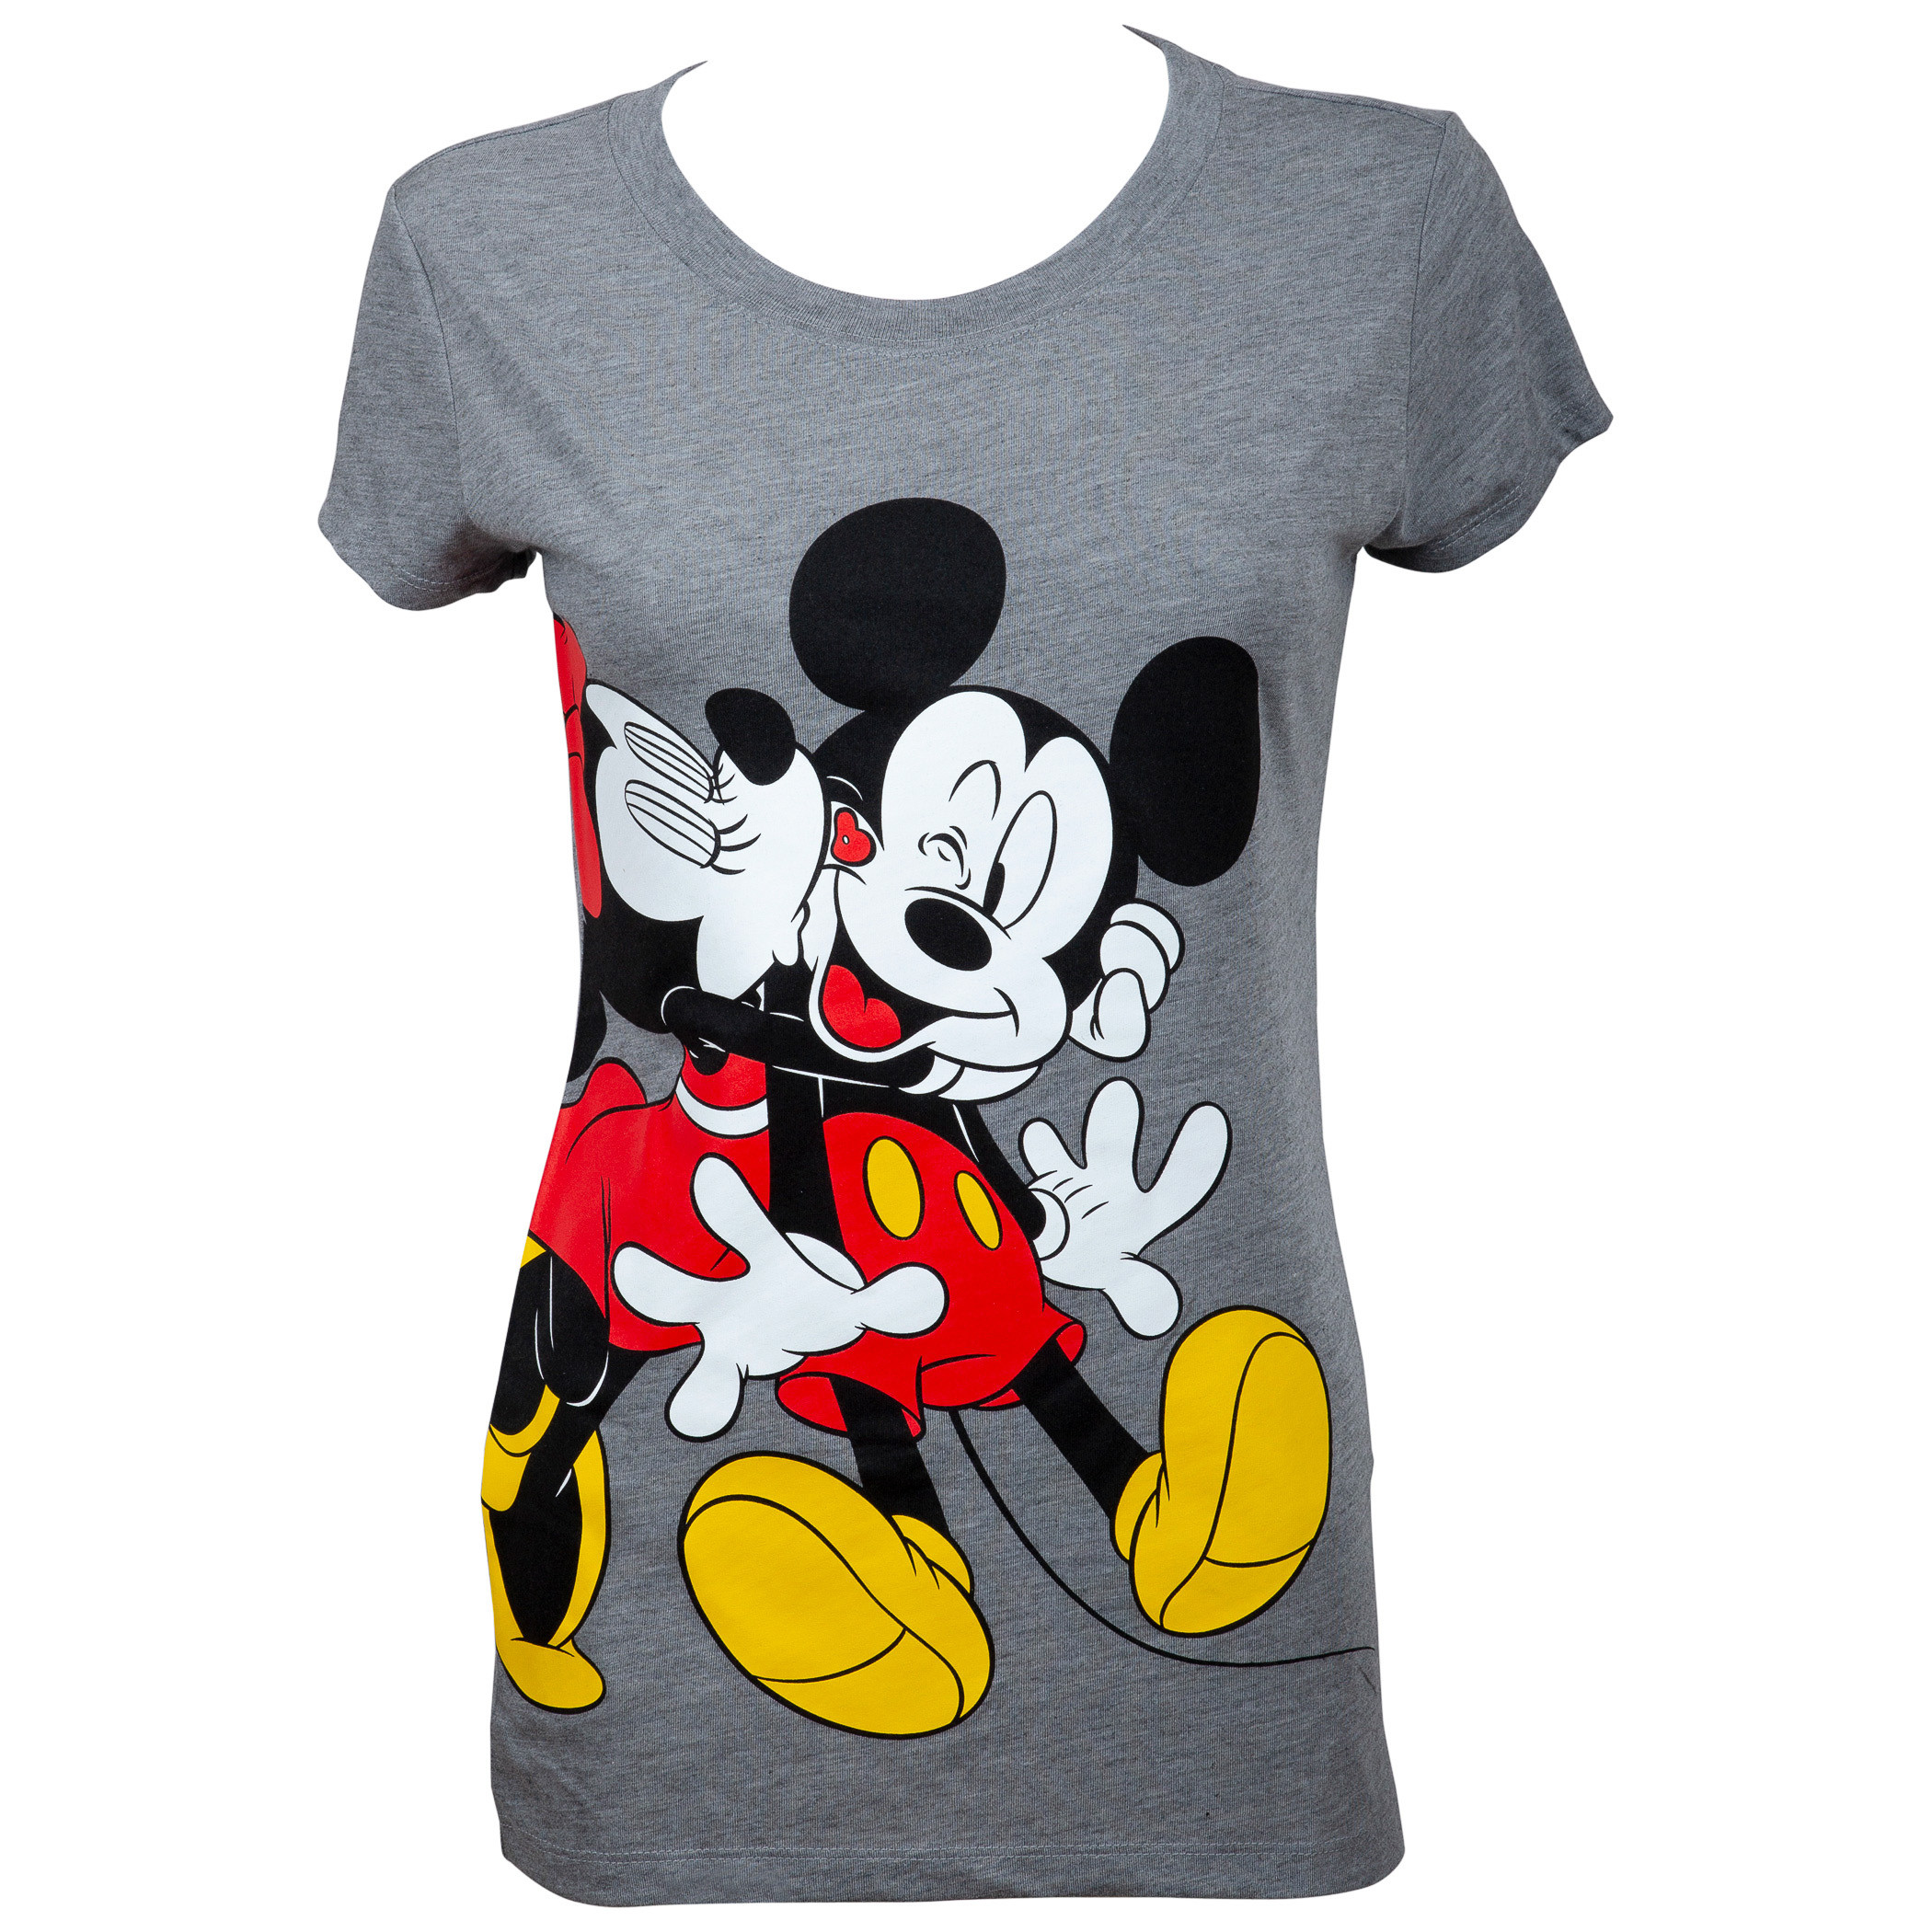 Mickey and Minnie Kissing Women's Grey T-Shirt